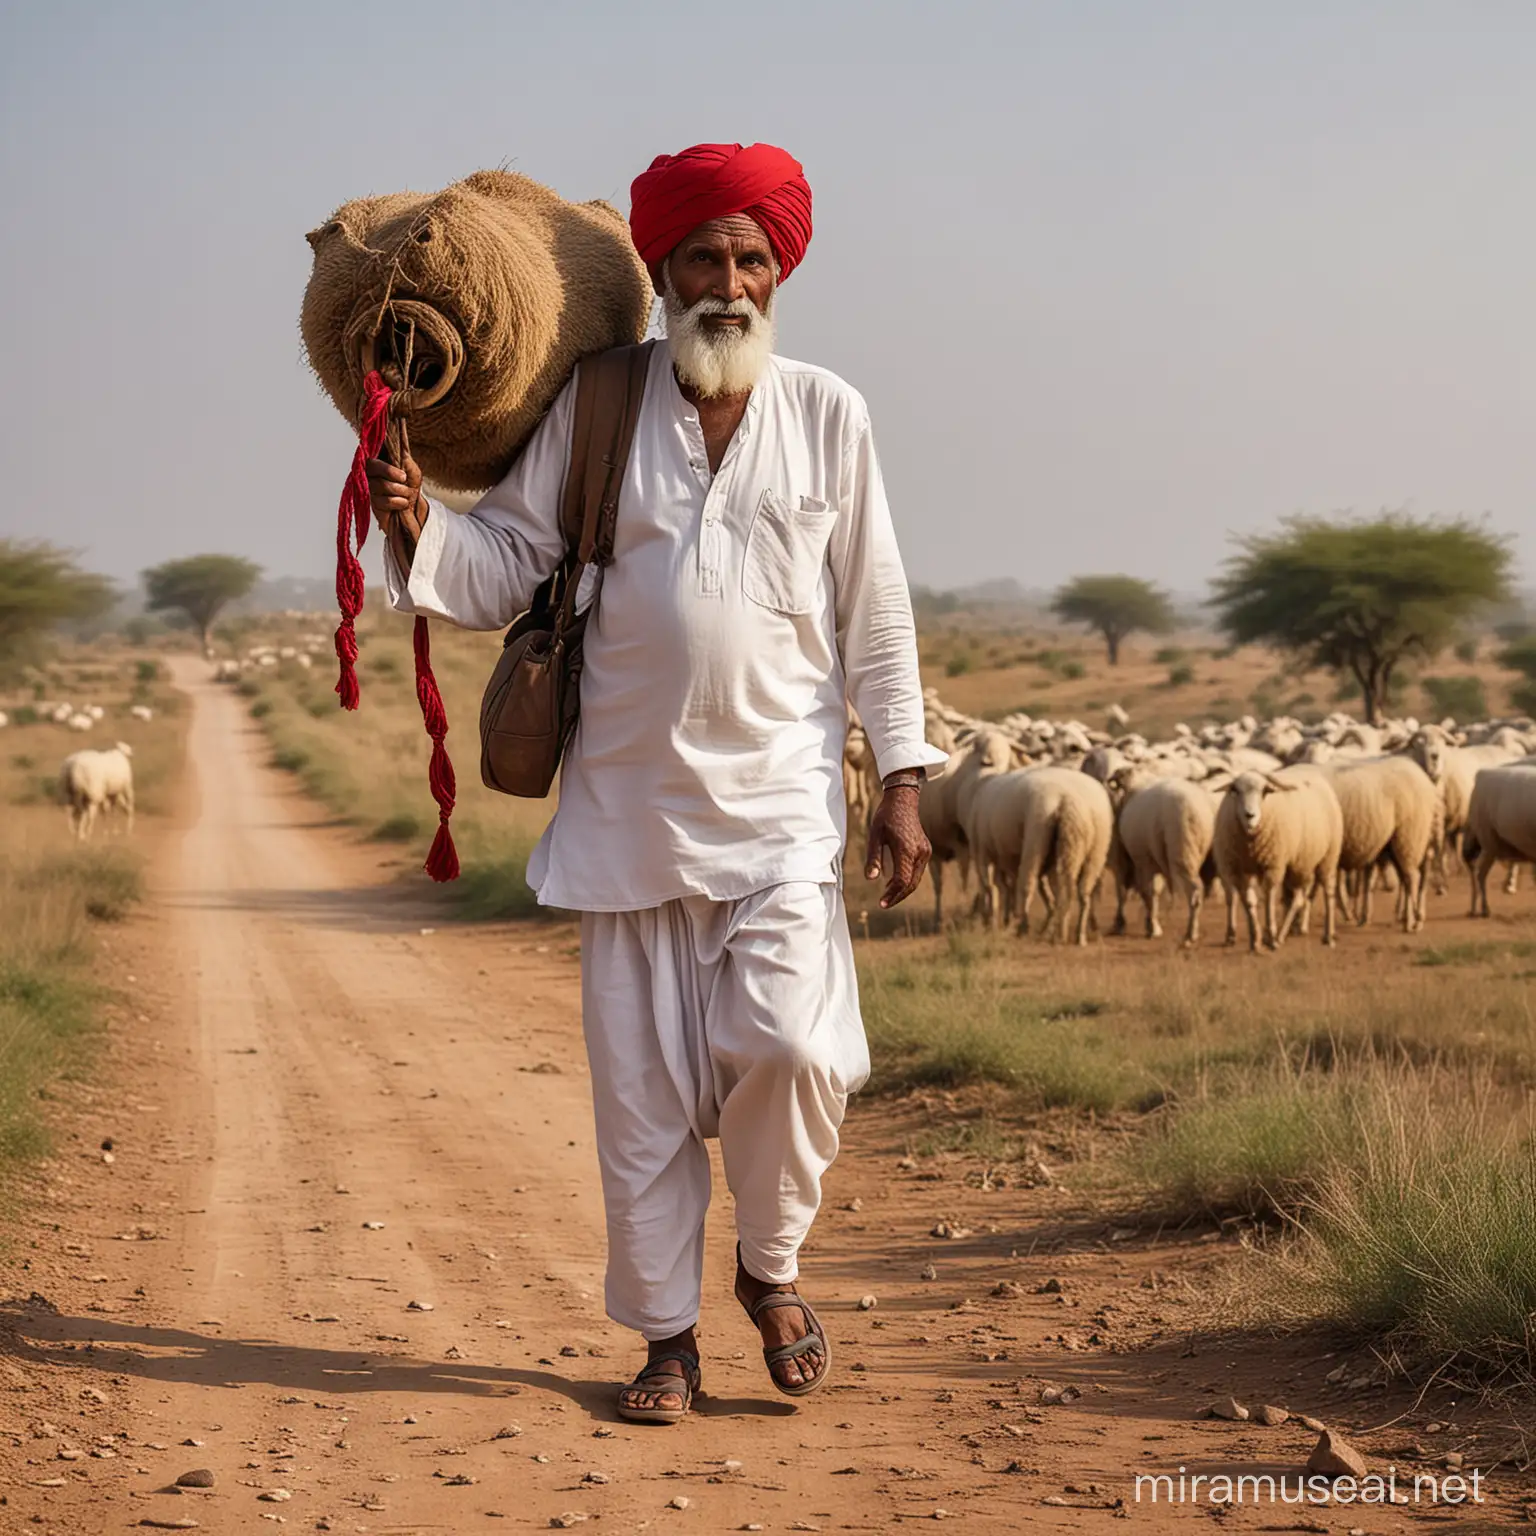 80 years old rabari man rajastha n dark skin  india with beard  in white clothing red turban  is  walking ina old  rajasthan landschape with a sheep in his hands  full wide  total body foto realistisch detailted fuji xt3  